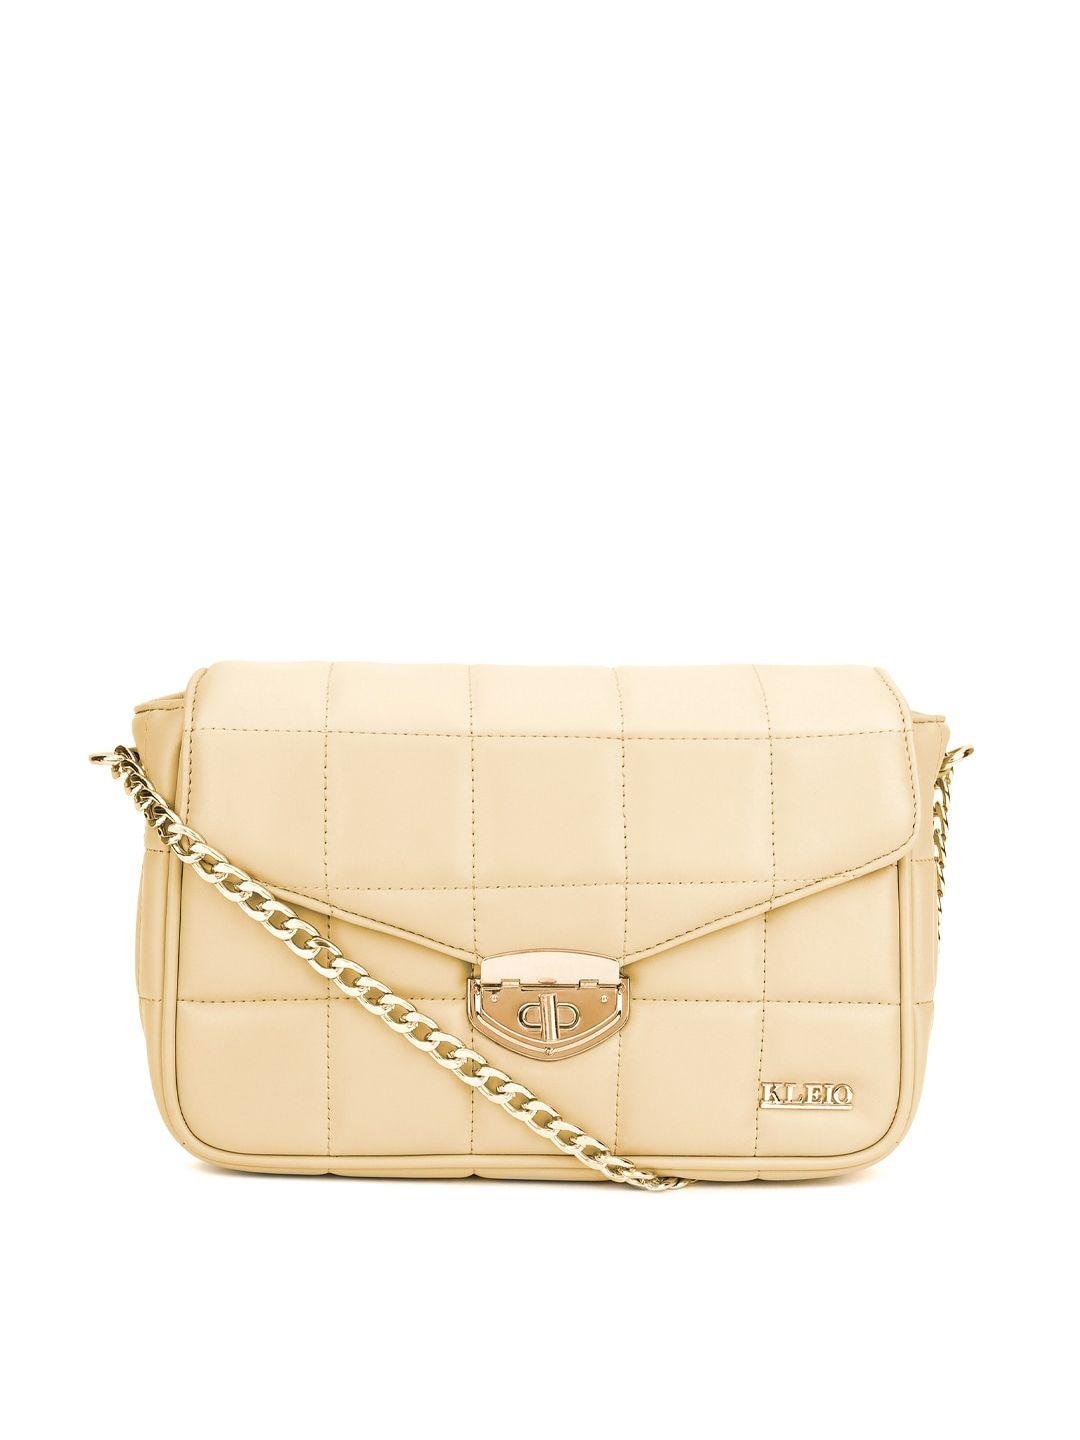 kleio textured quilted structured sling bag